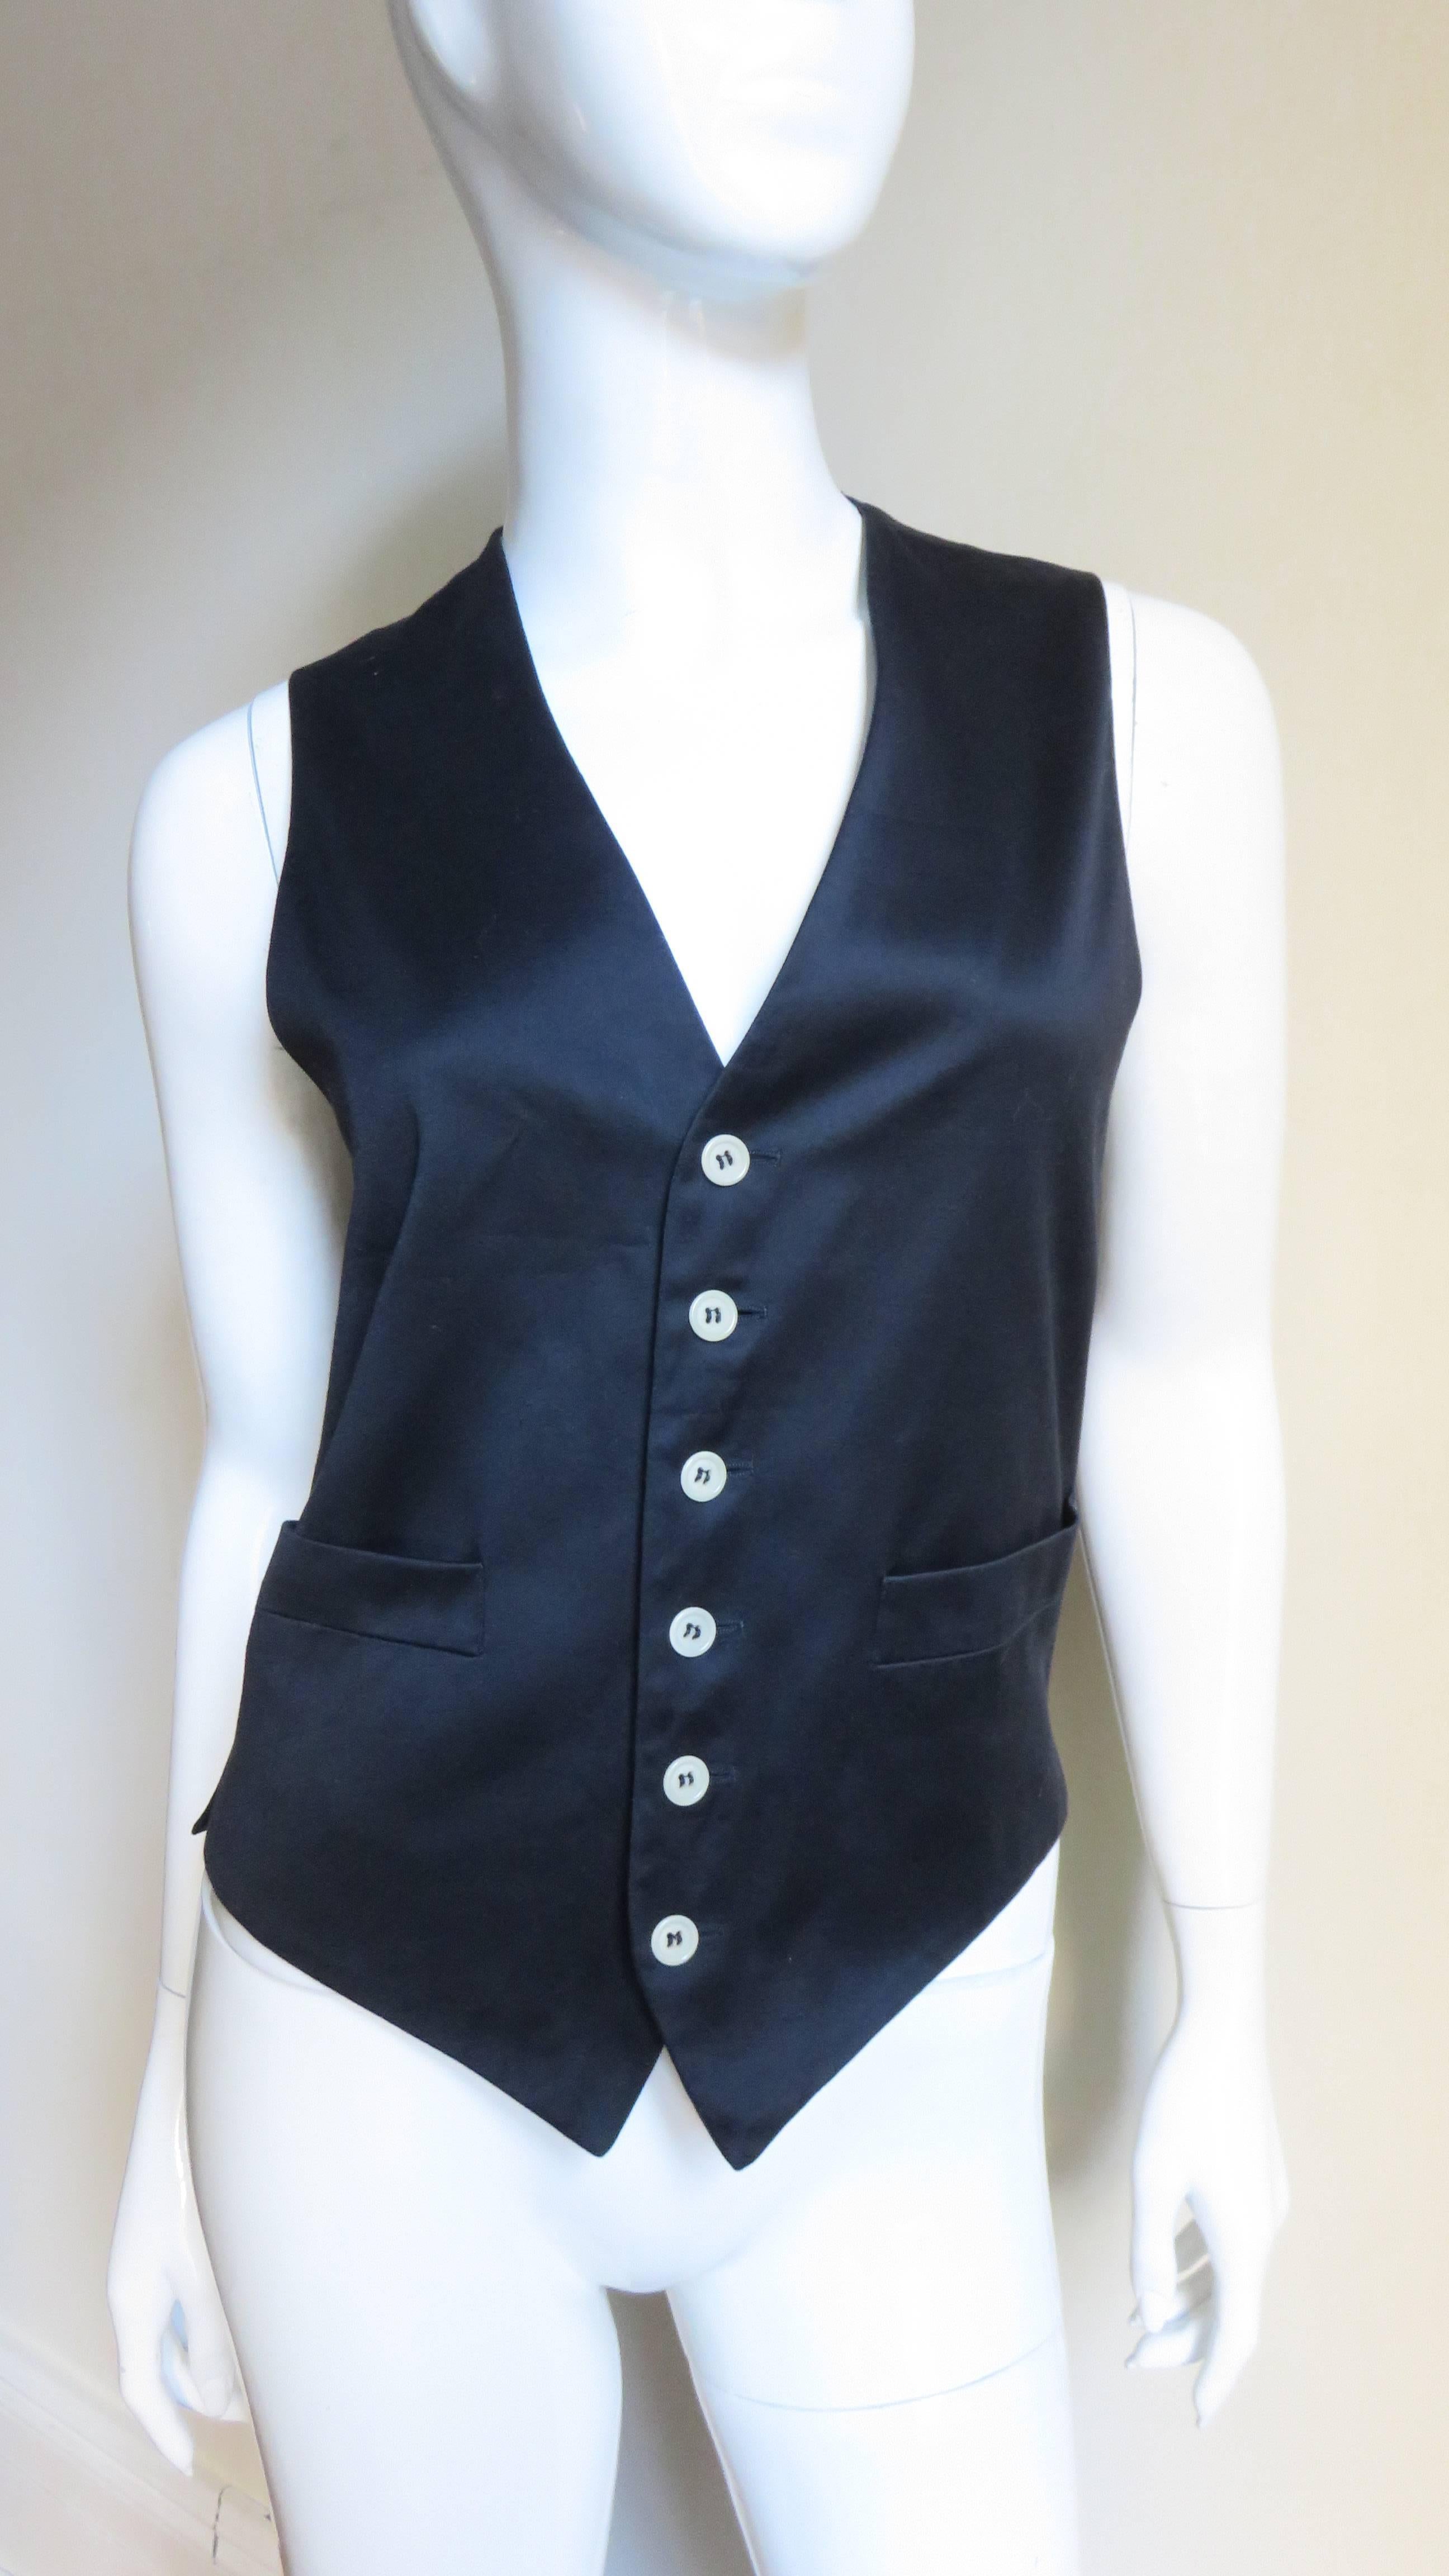 A fabulous black silk vest from Moschino.  It is a simple black basic vest with off white buttons closing up the front and 2 waist pockets.  The back is adorned with a large off white silk applique question mark. 
Fits size Medium, Large.

Bust 